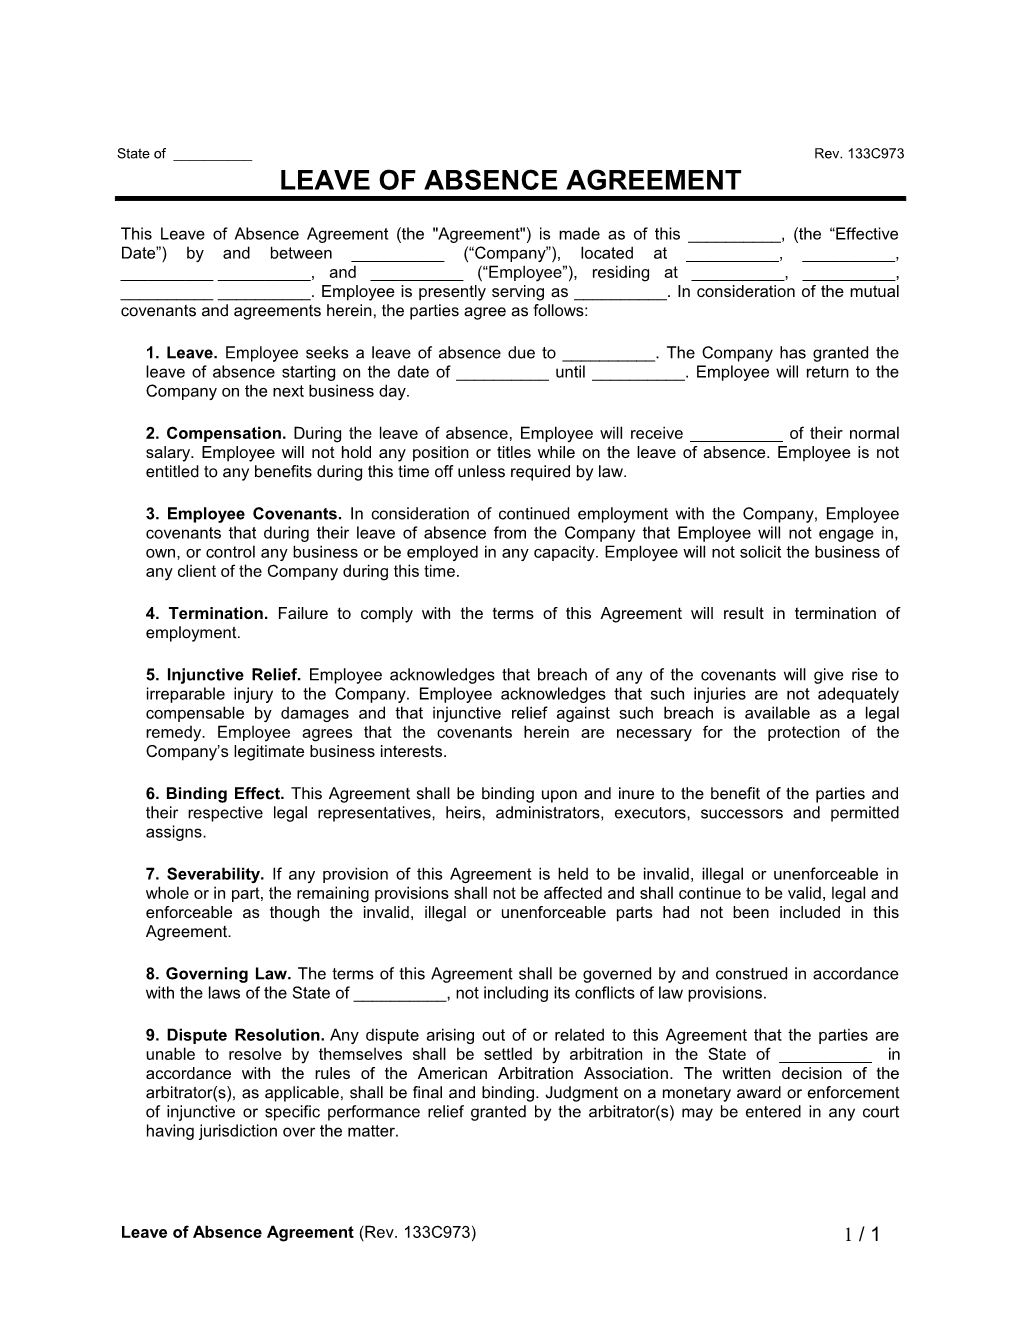 This Leave of Absence Agreement (The Agreement ) Is Made As of This ______, (The Effective